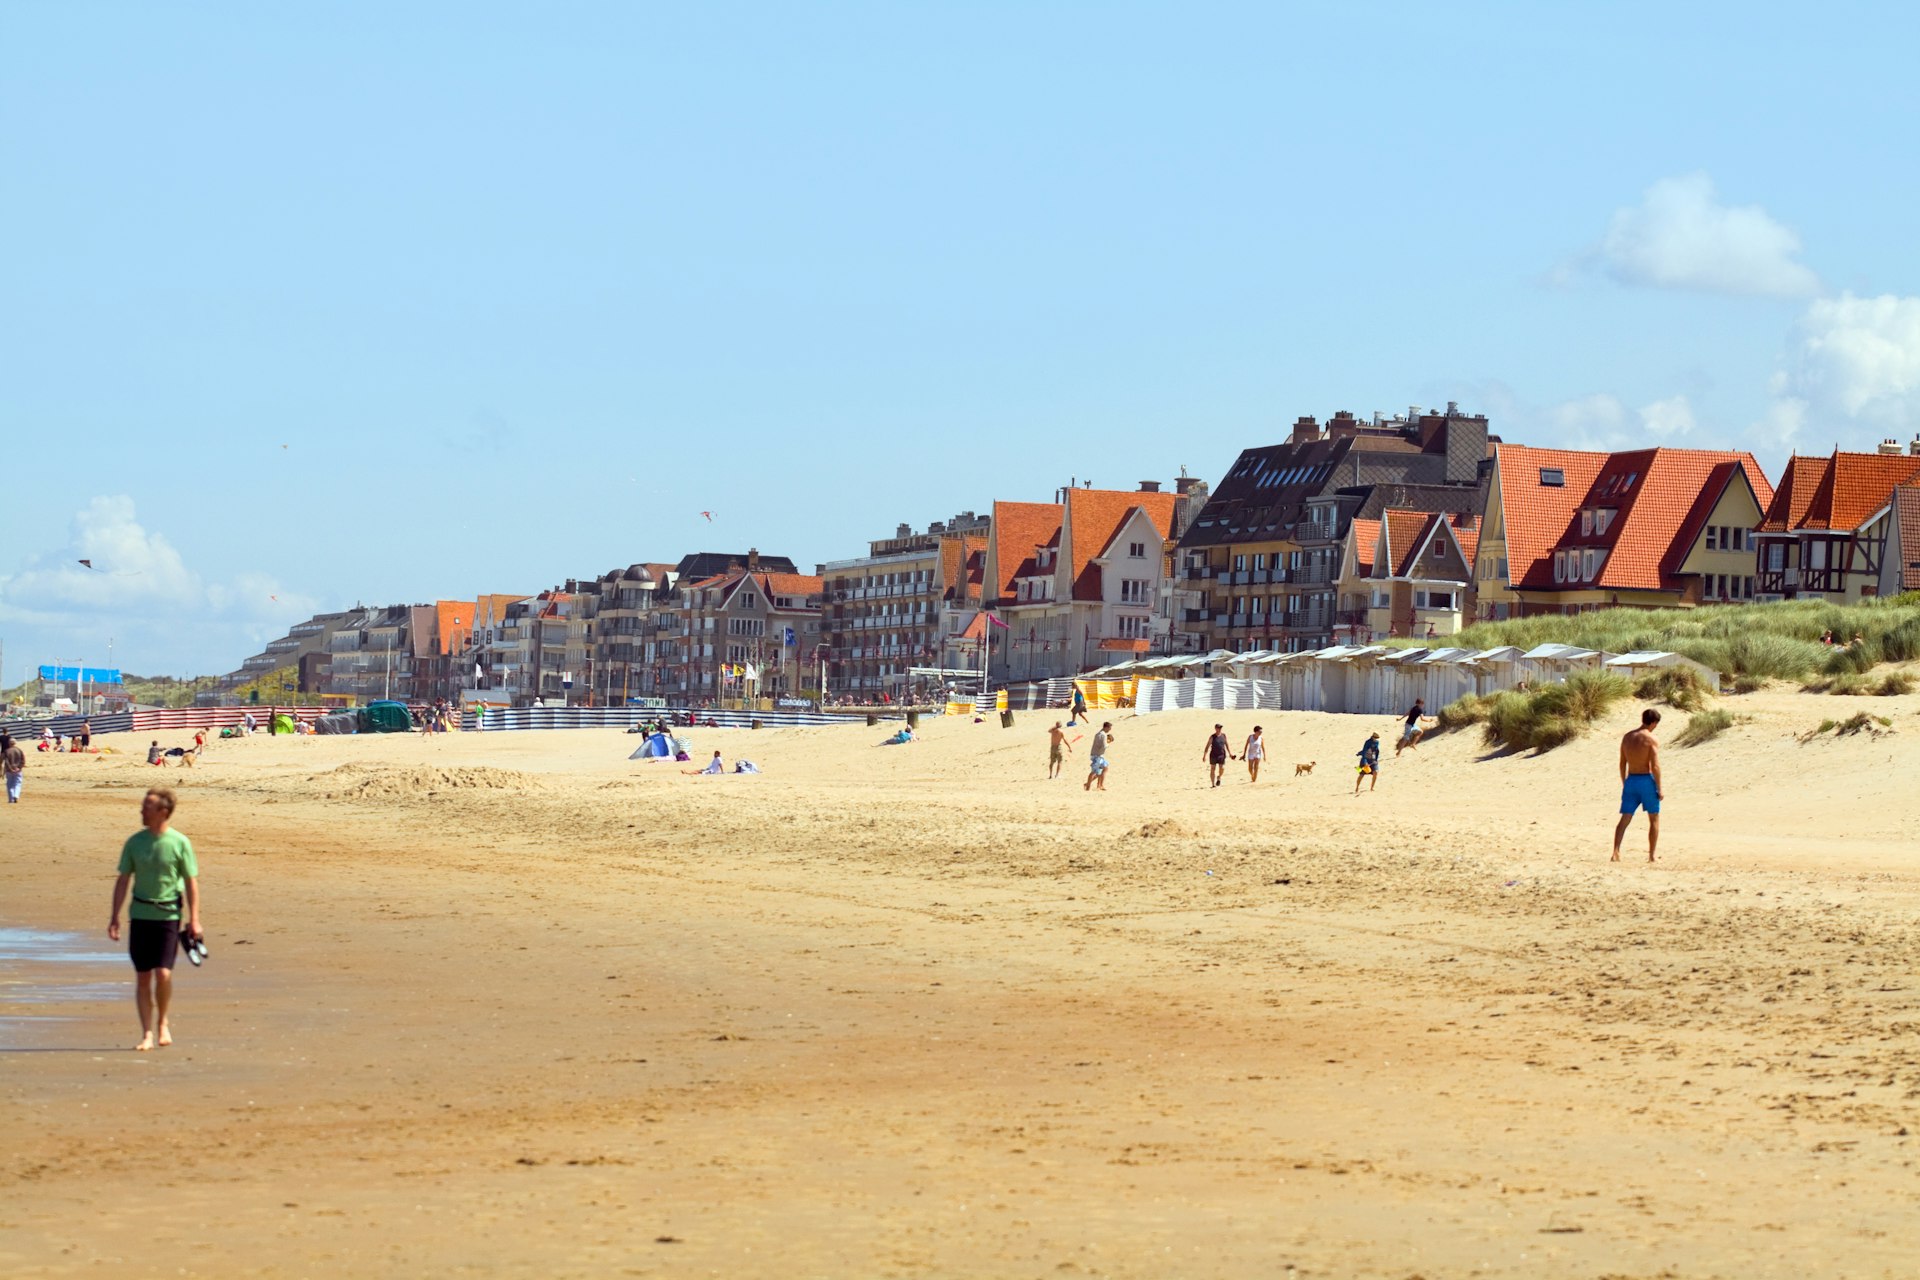 Summer day at the beach in De Haan, on the Belgian North Sea coast, with people walking along beach and a view of a promenade with hotels. 